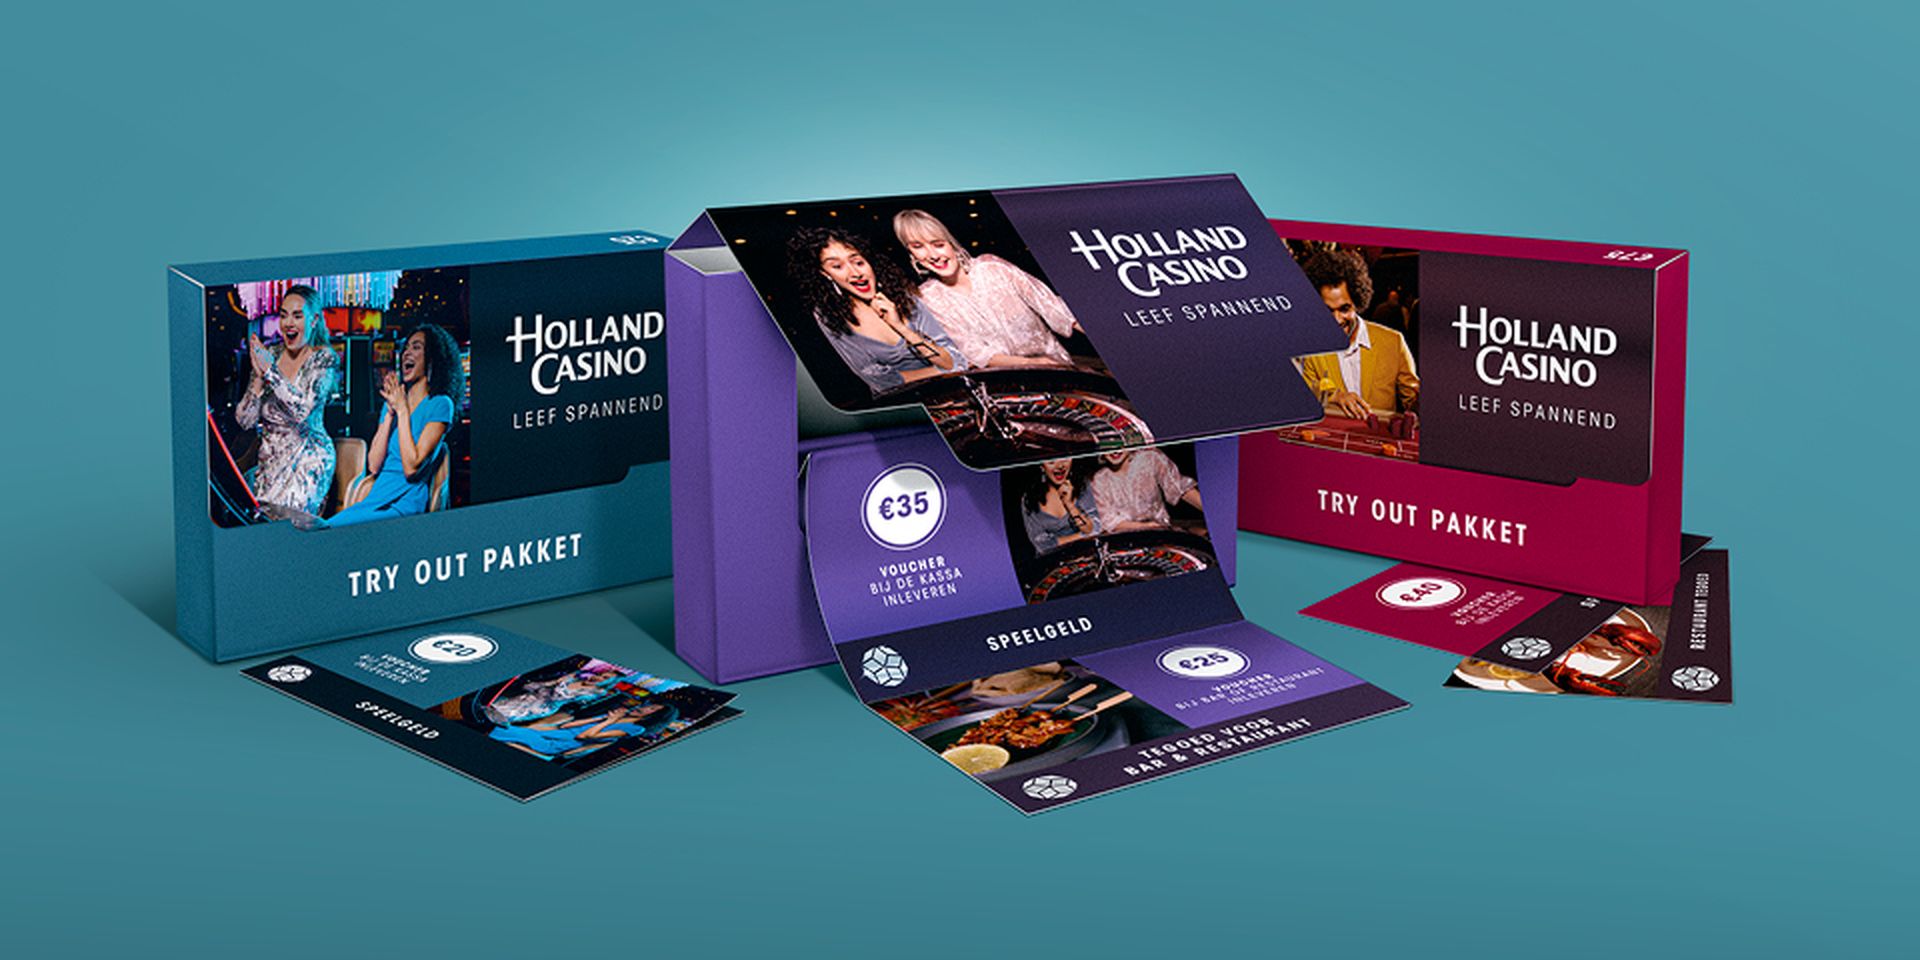 holland-casino-try-out-experience-25-50-75-euro-entree-speelgeld-voucher-restaurant